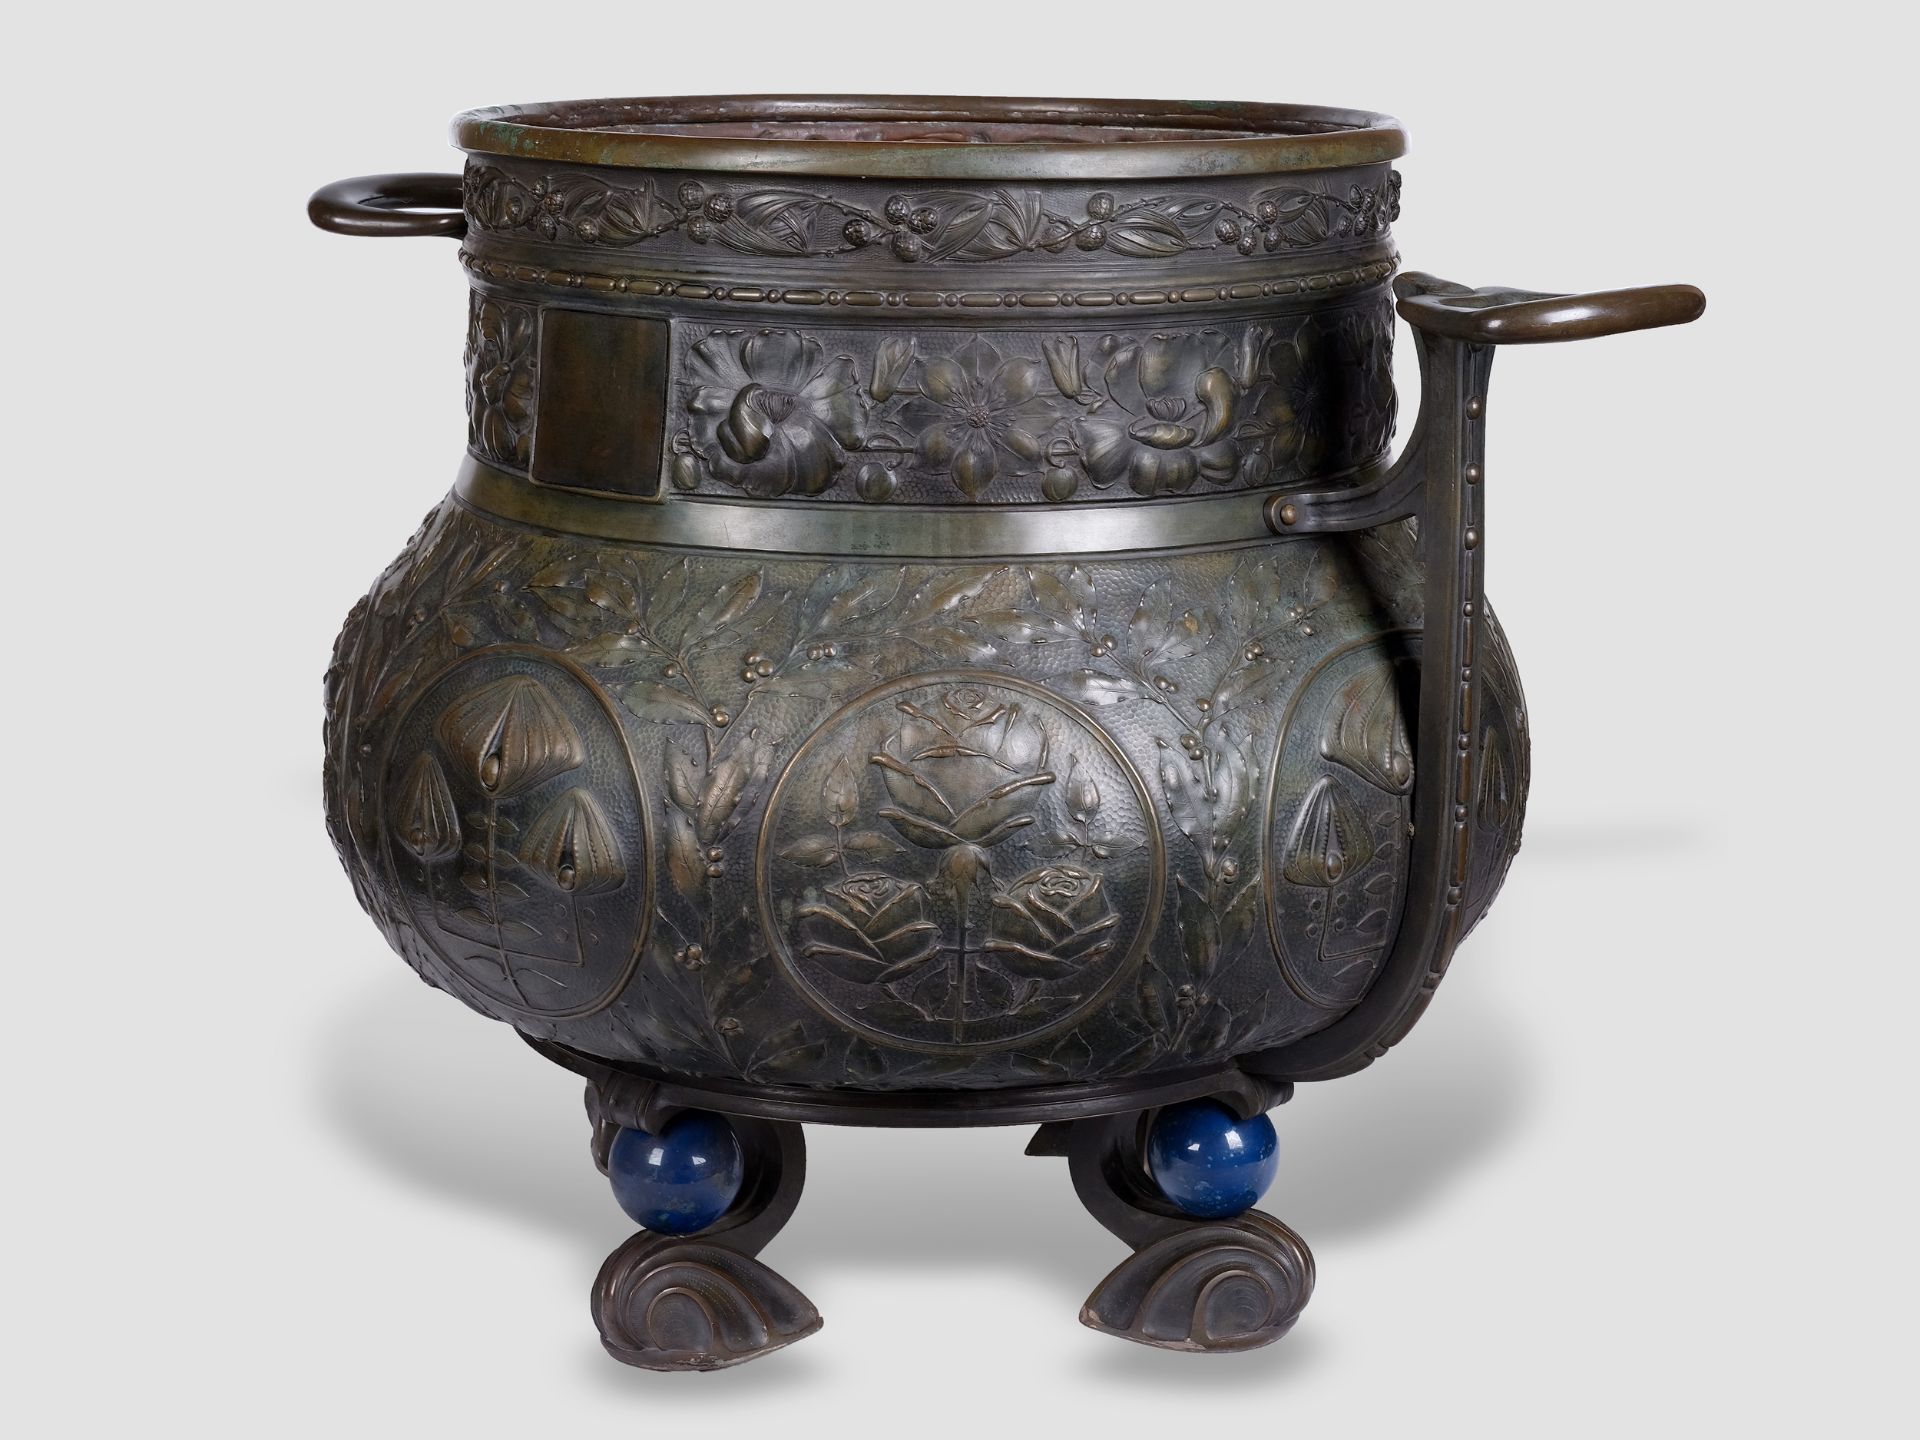 Highly important Russian planter, Modern style, Art Nuovo, Moscow around 1890/1900 - Image 2 of 12